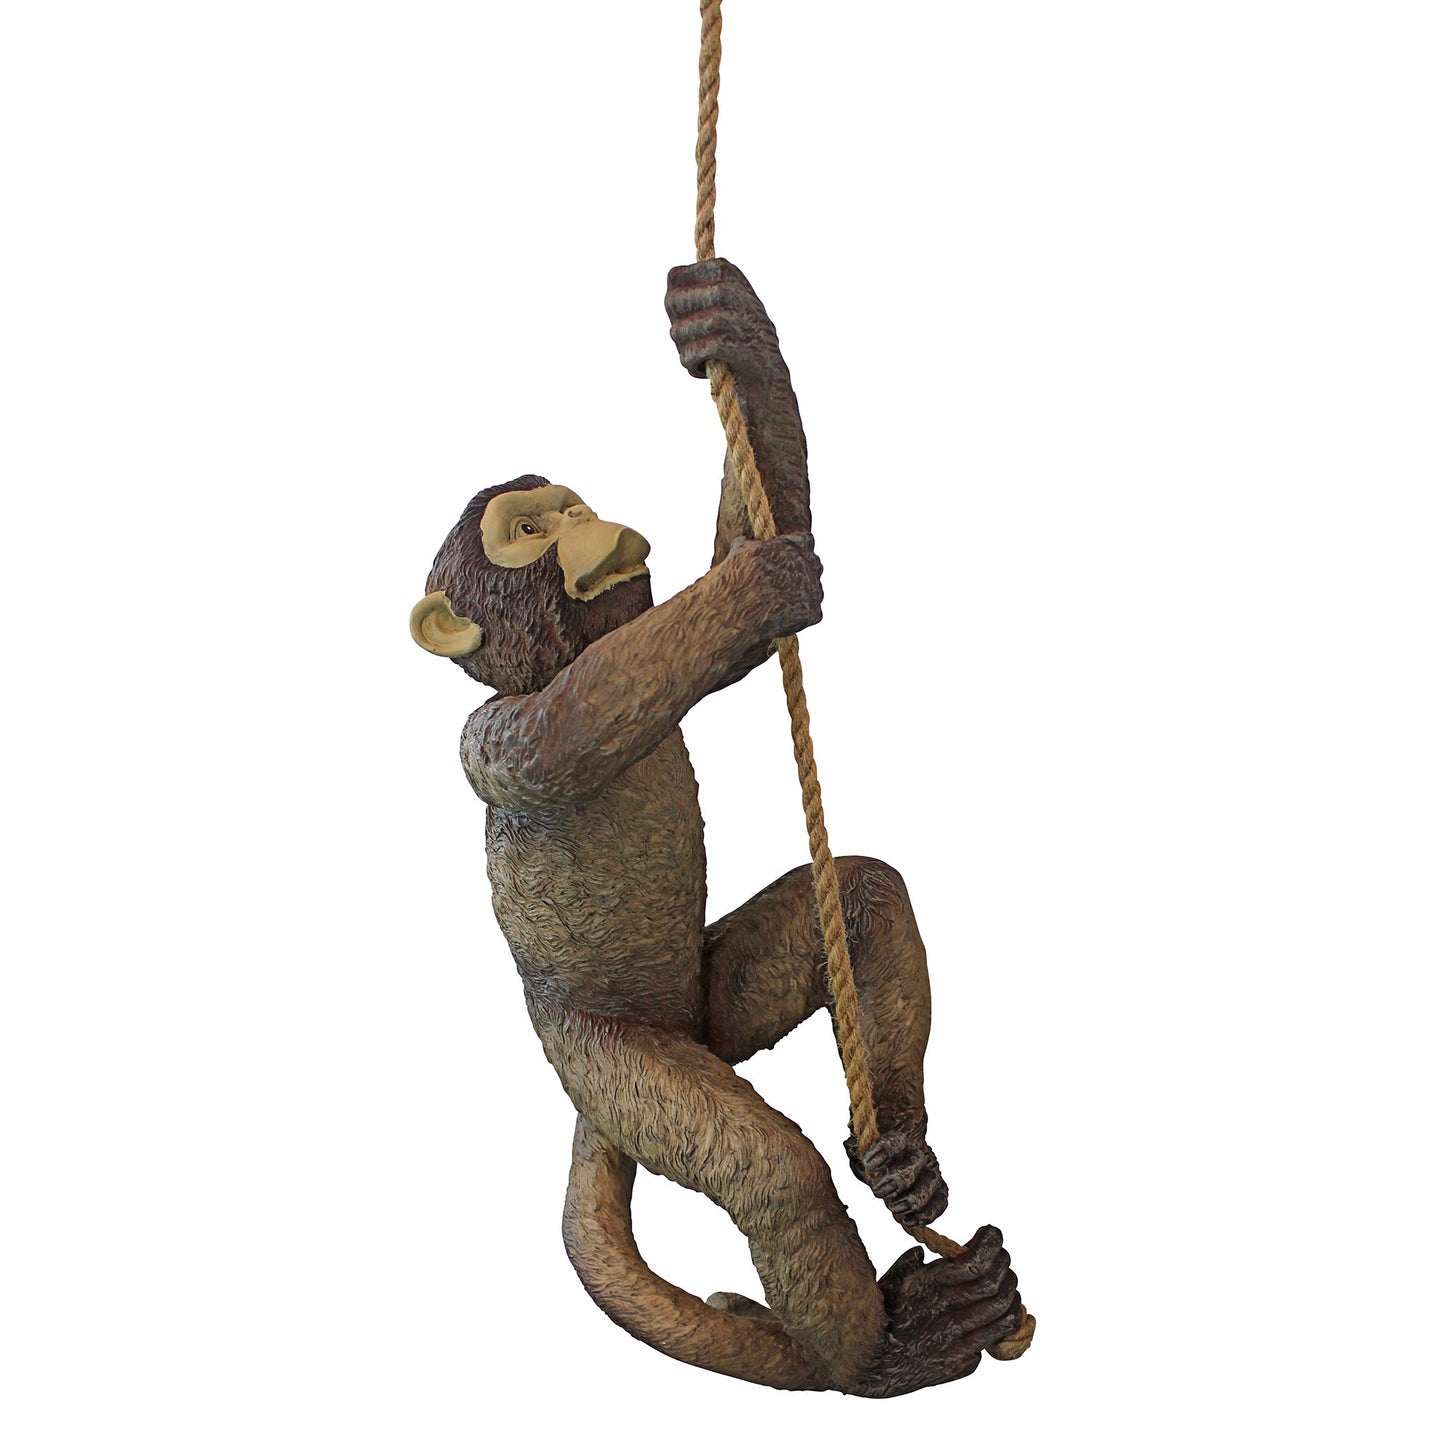 Quarter view of a fake monkey made from resin climbing up a rope on a white background